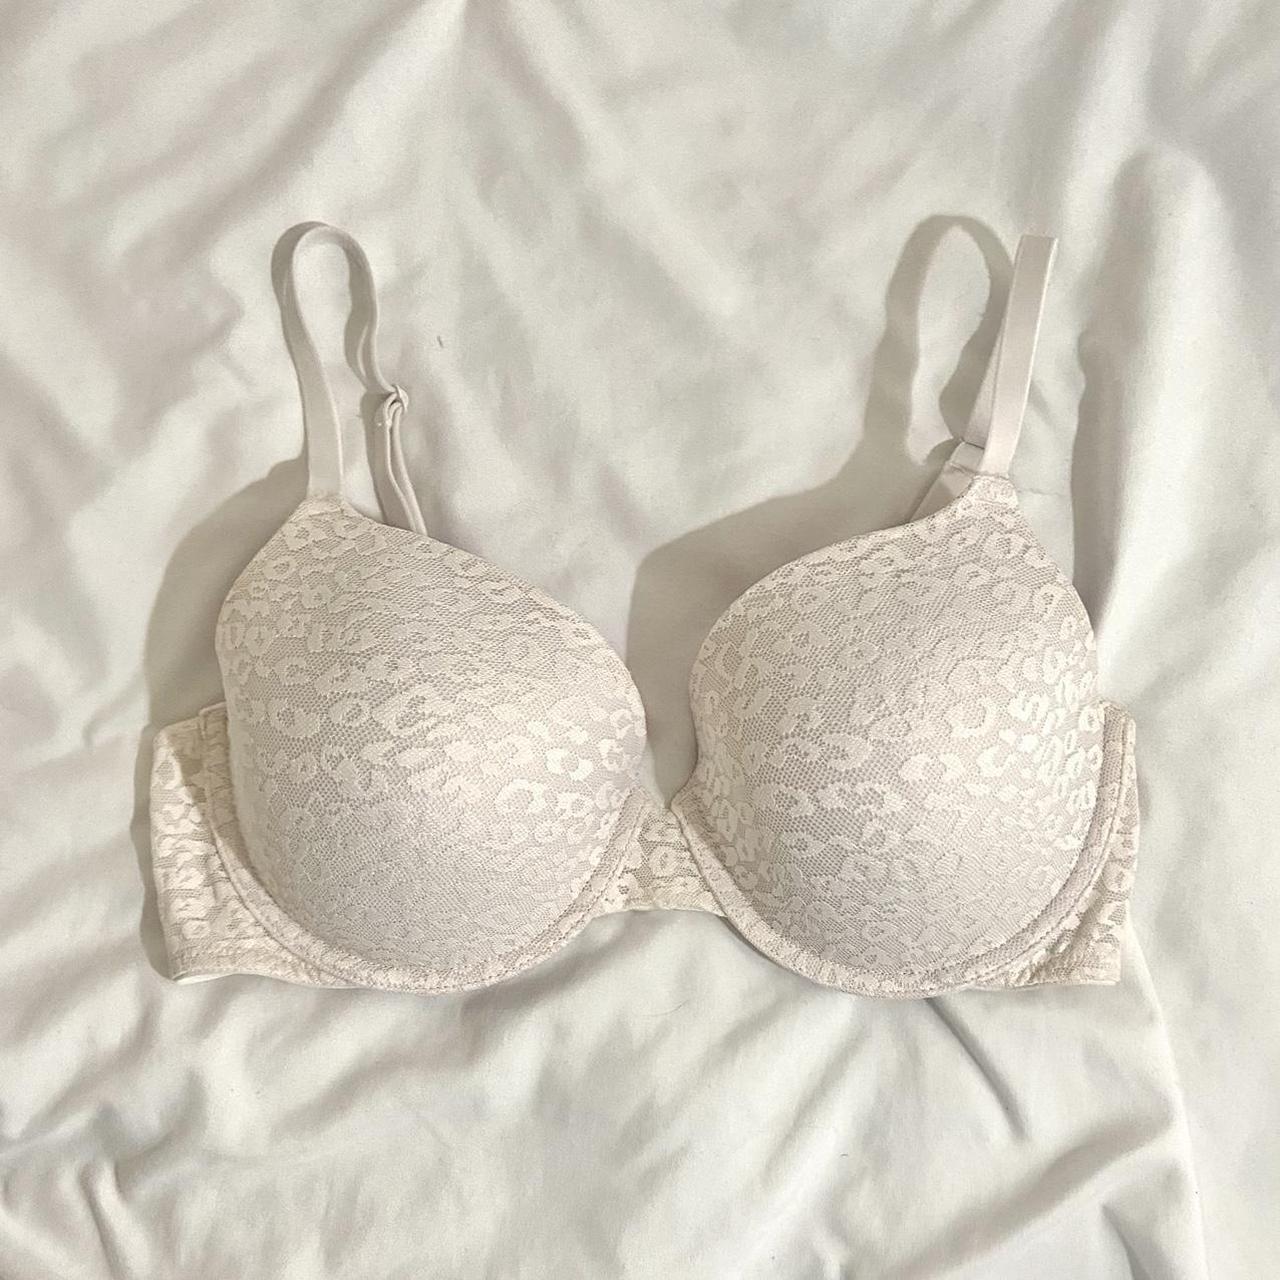 white lace cheetah print bra from PINK by victoria's - Depop